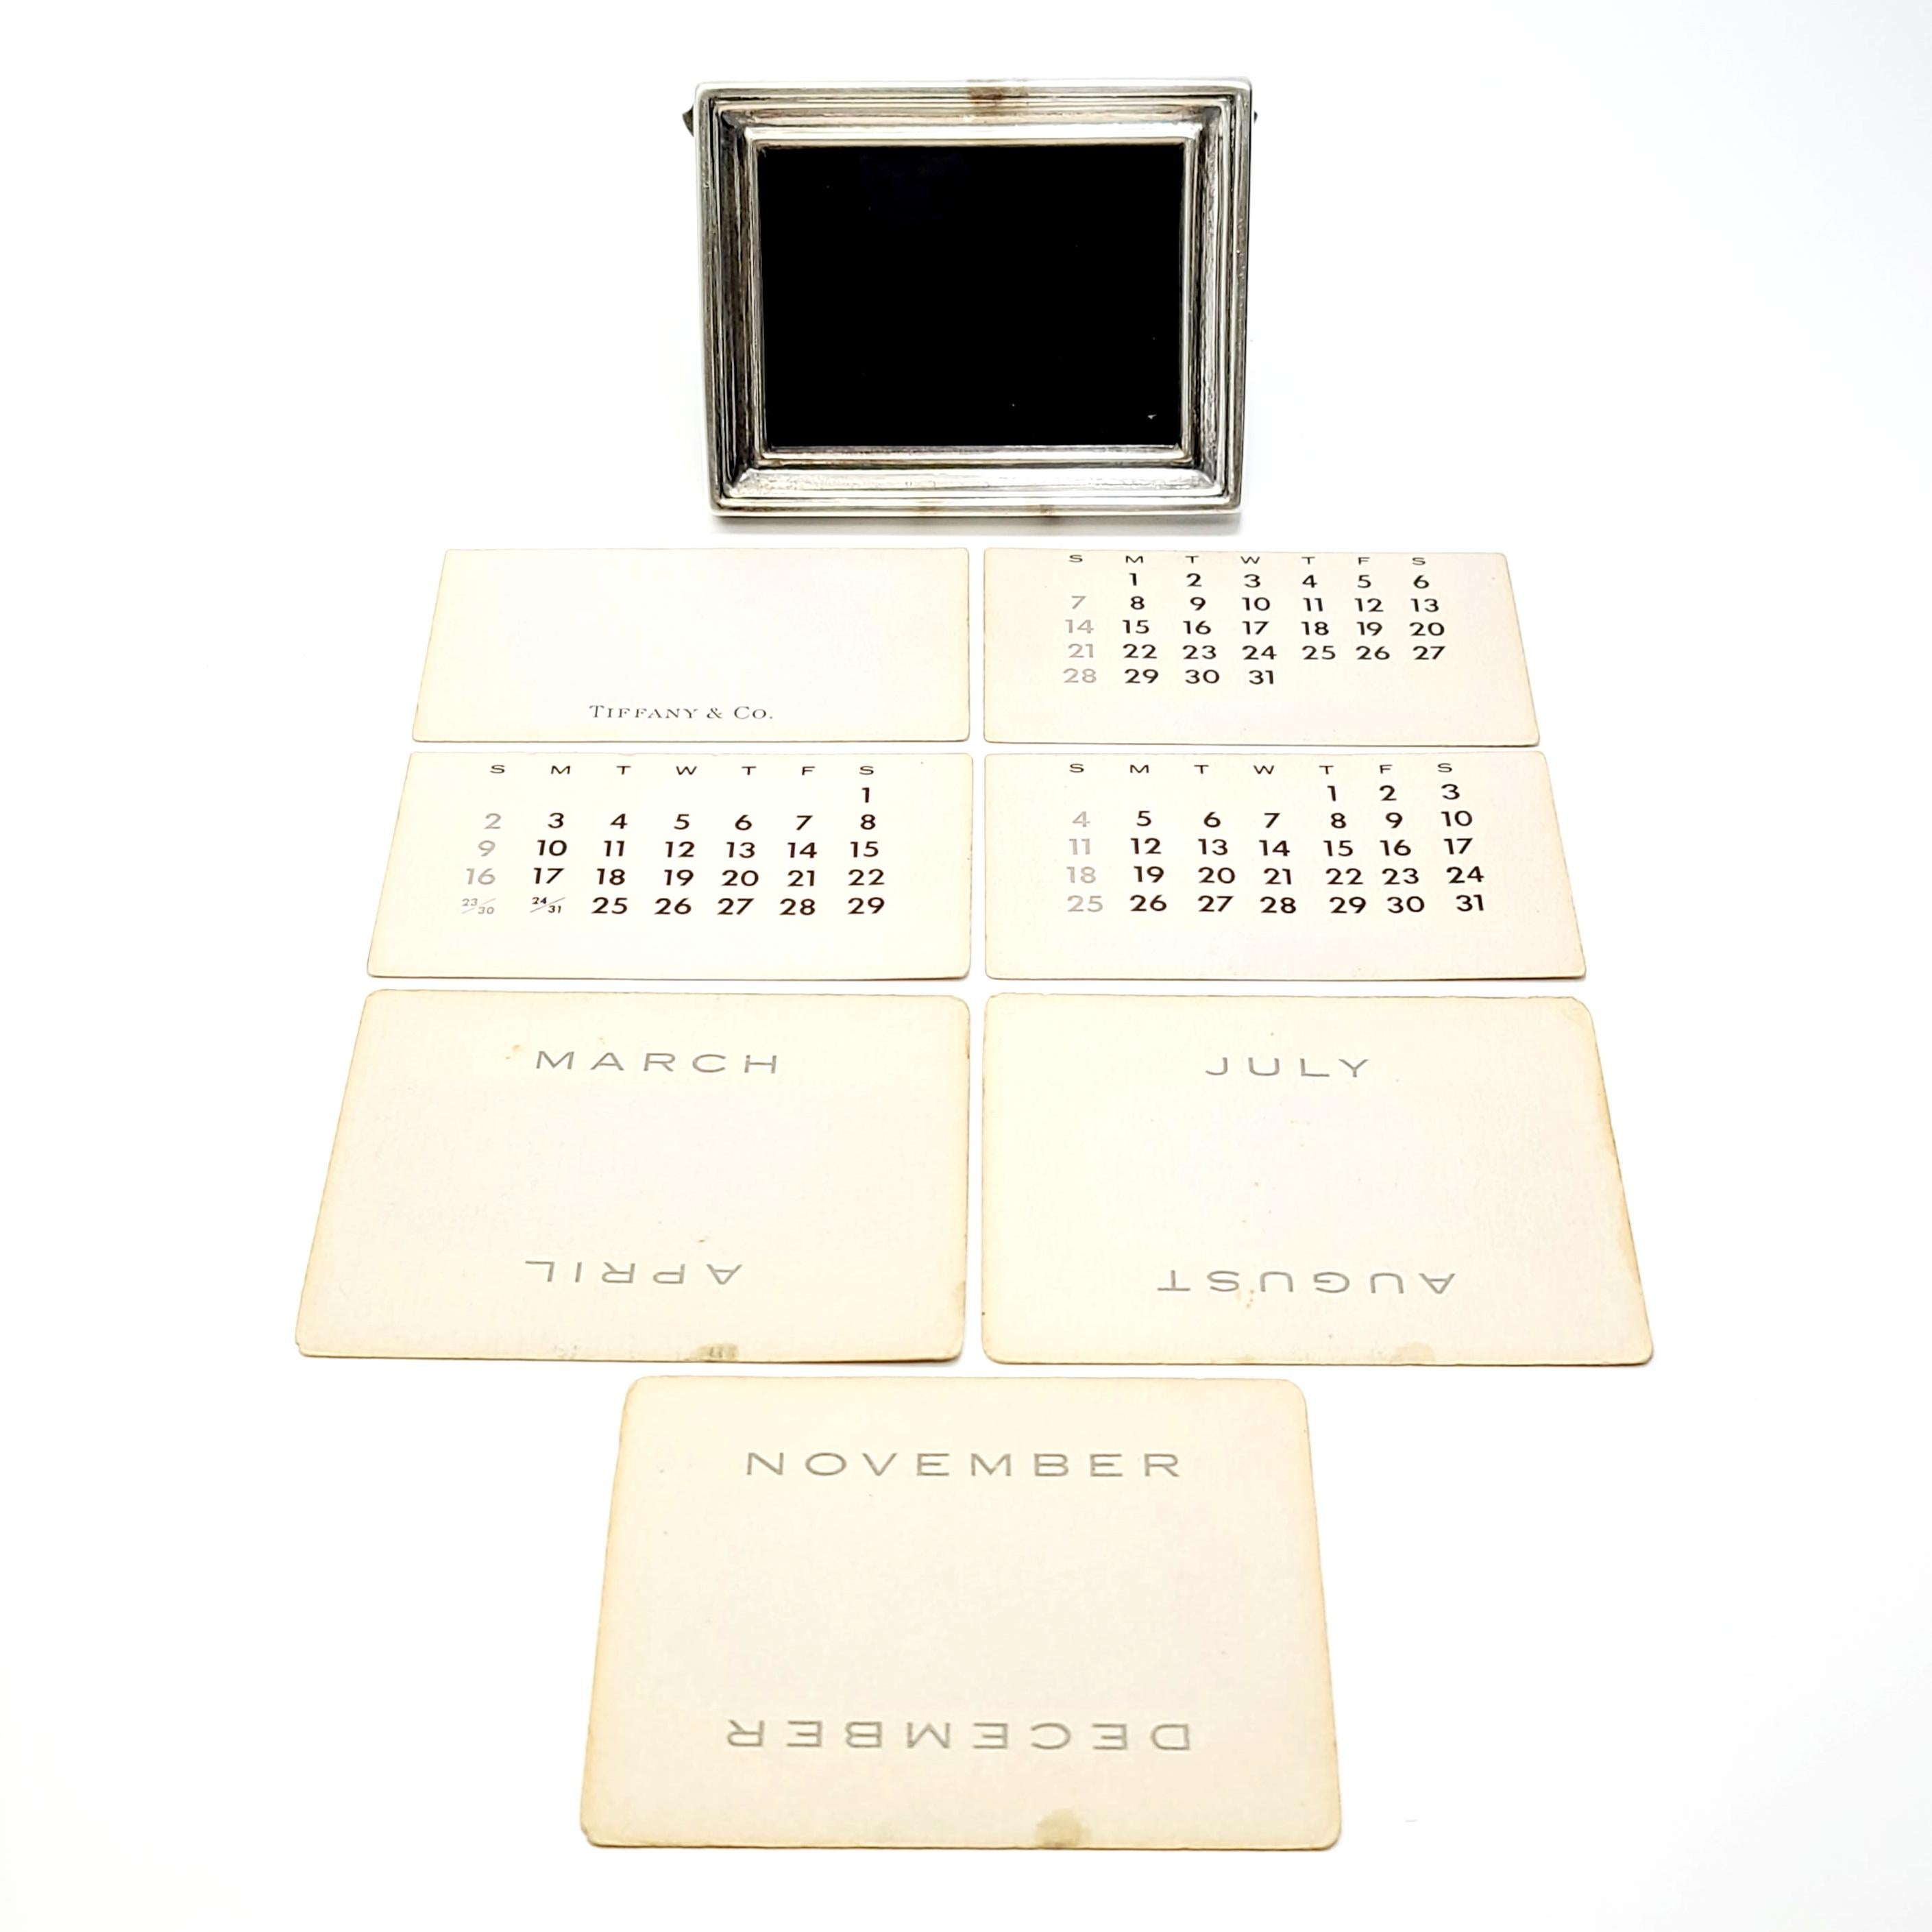 Vintage sterling silver frame perpetual calendar by Tiffany & Co.

A sterling silver frame displays the month and days of any year. Includes cards with every month on top, and cards with the days starting on all different first days of the month